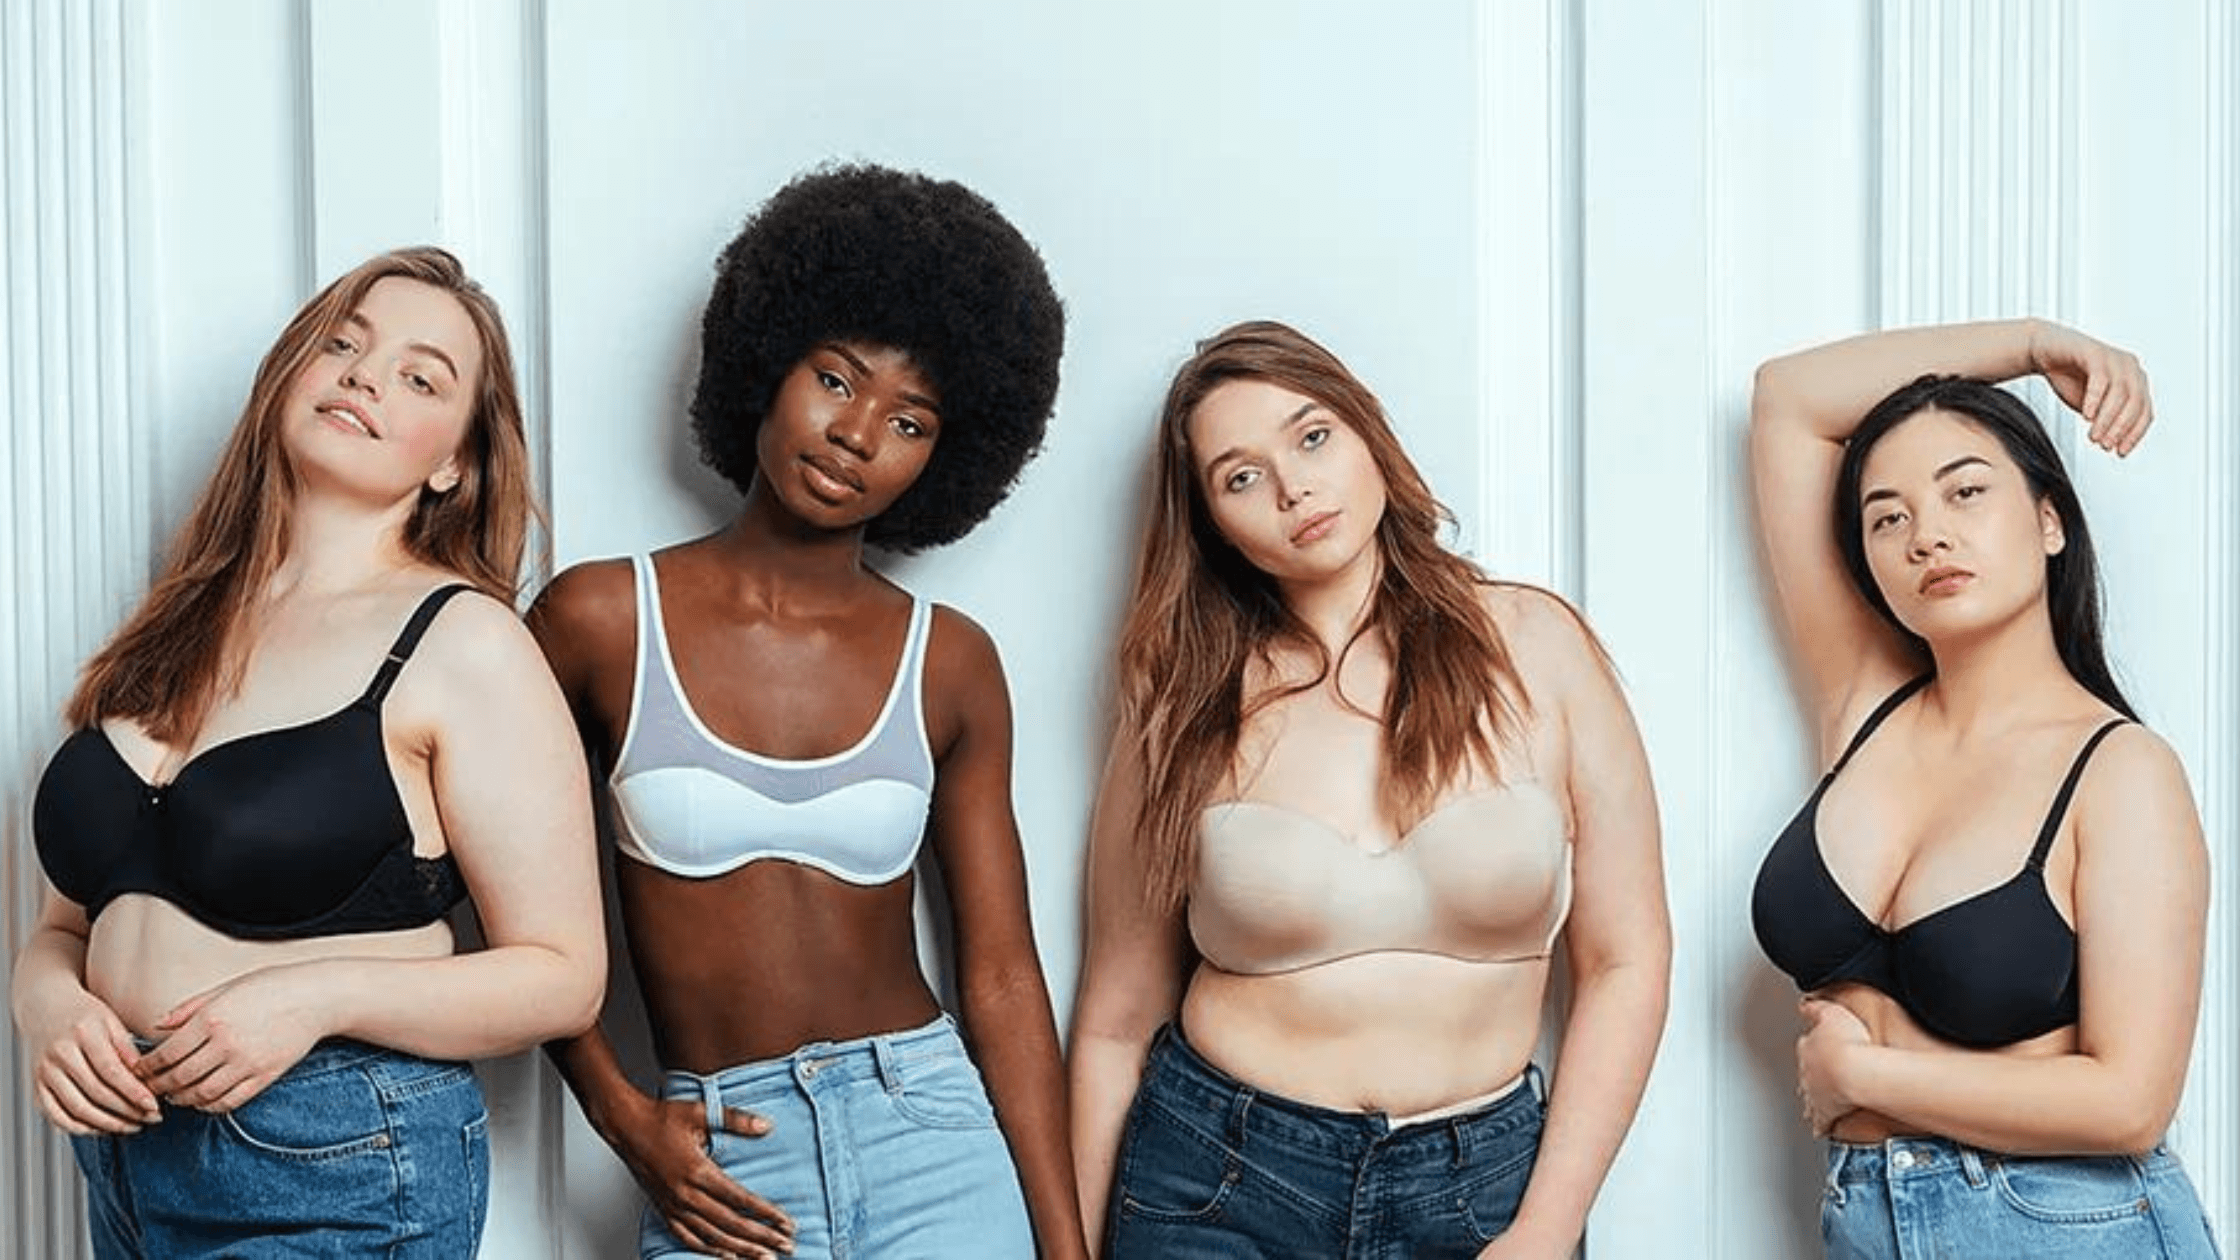 Which Bra Type Suits Your Body Aesthetics Best?